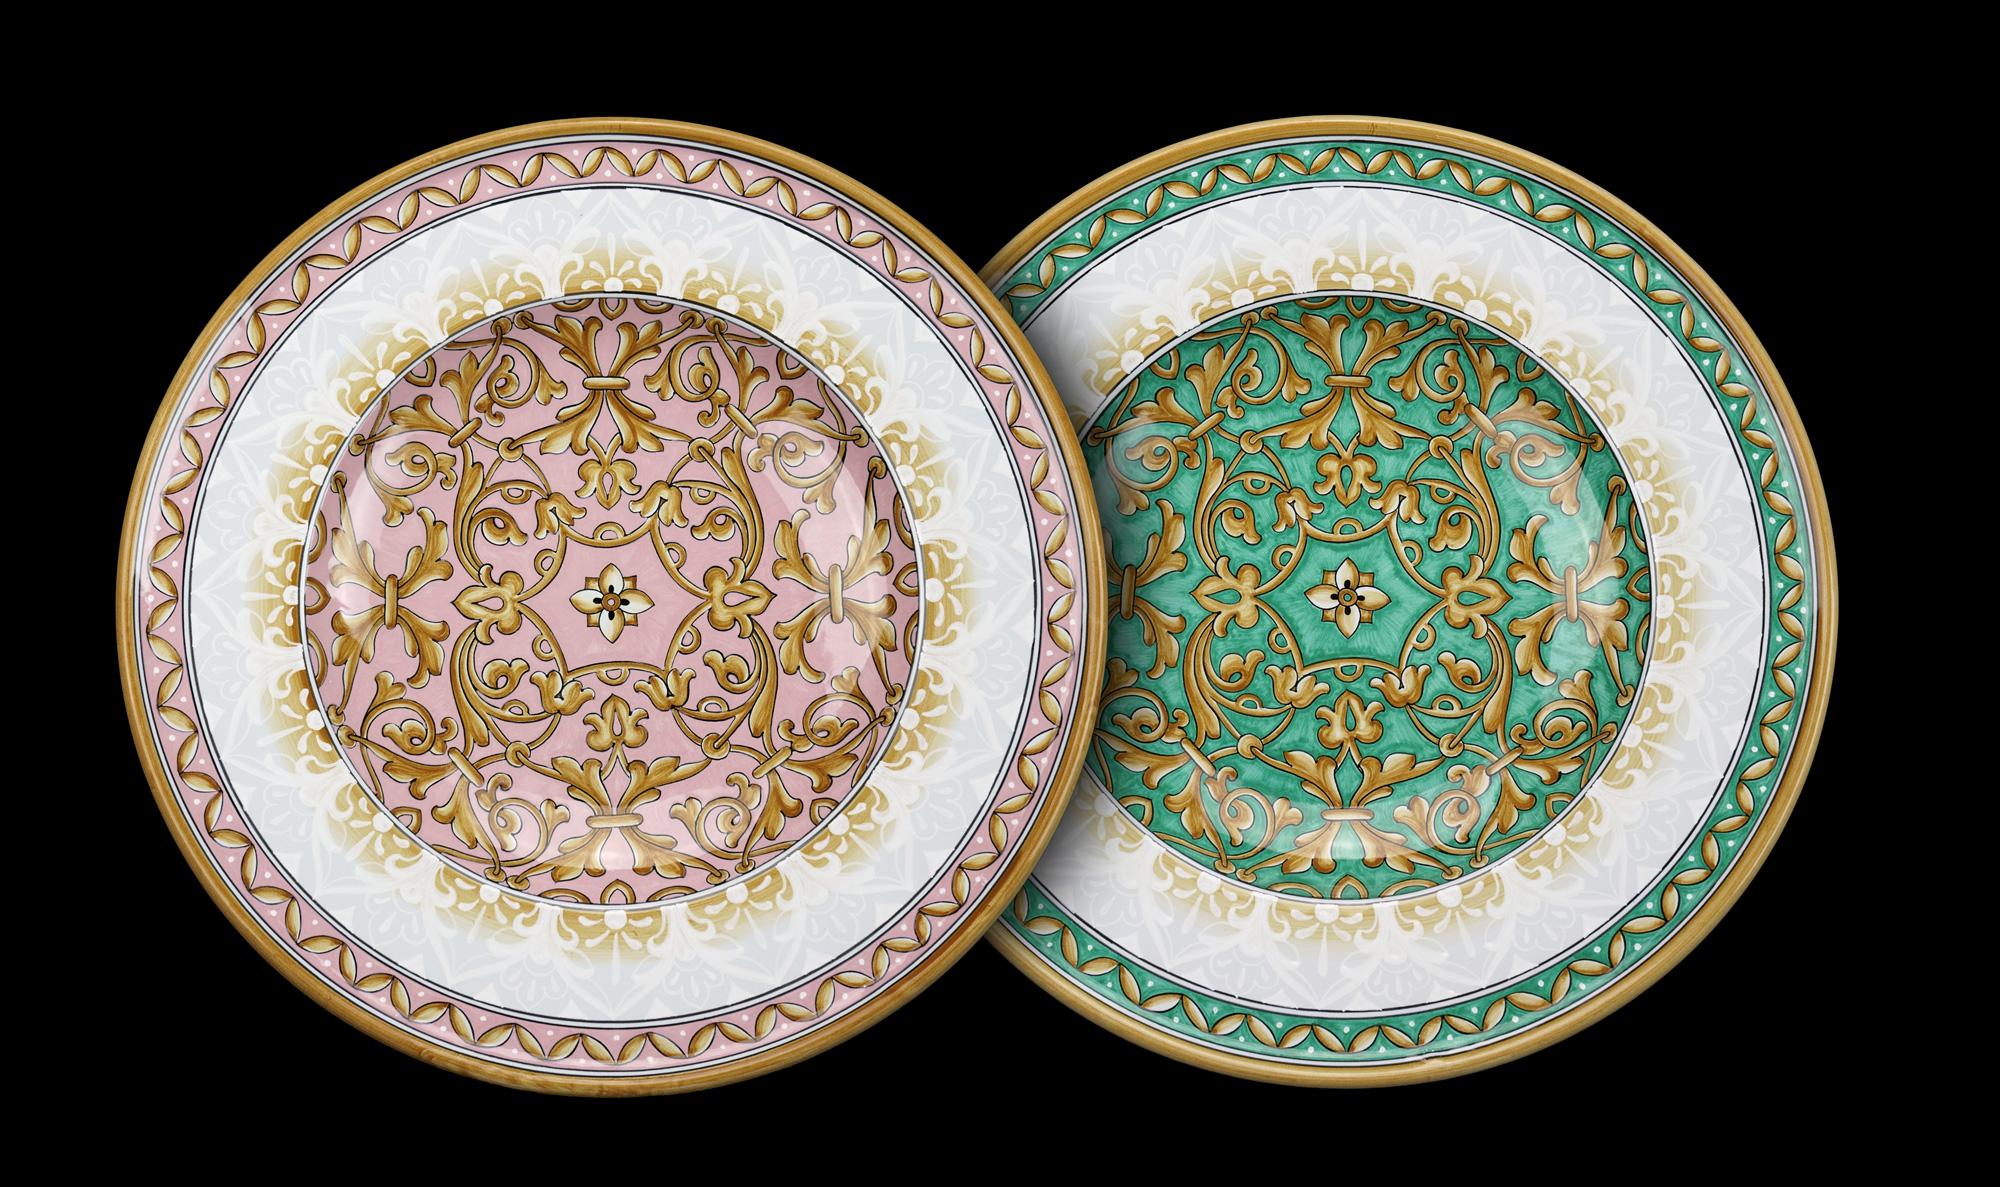 Contemporary Plate Bowl Centerpiece Tableware Platter Decorated Wall Dish Majolica Painted For Sale